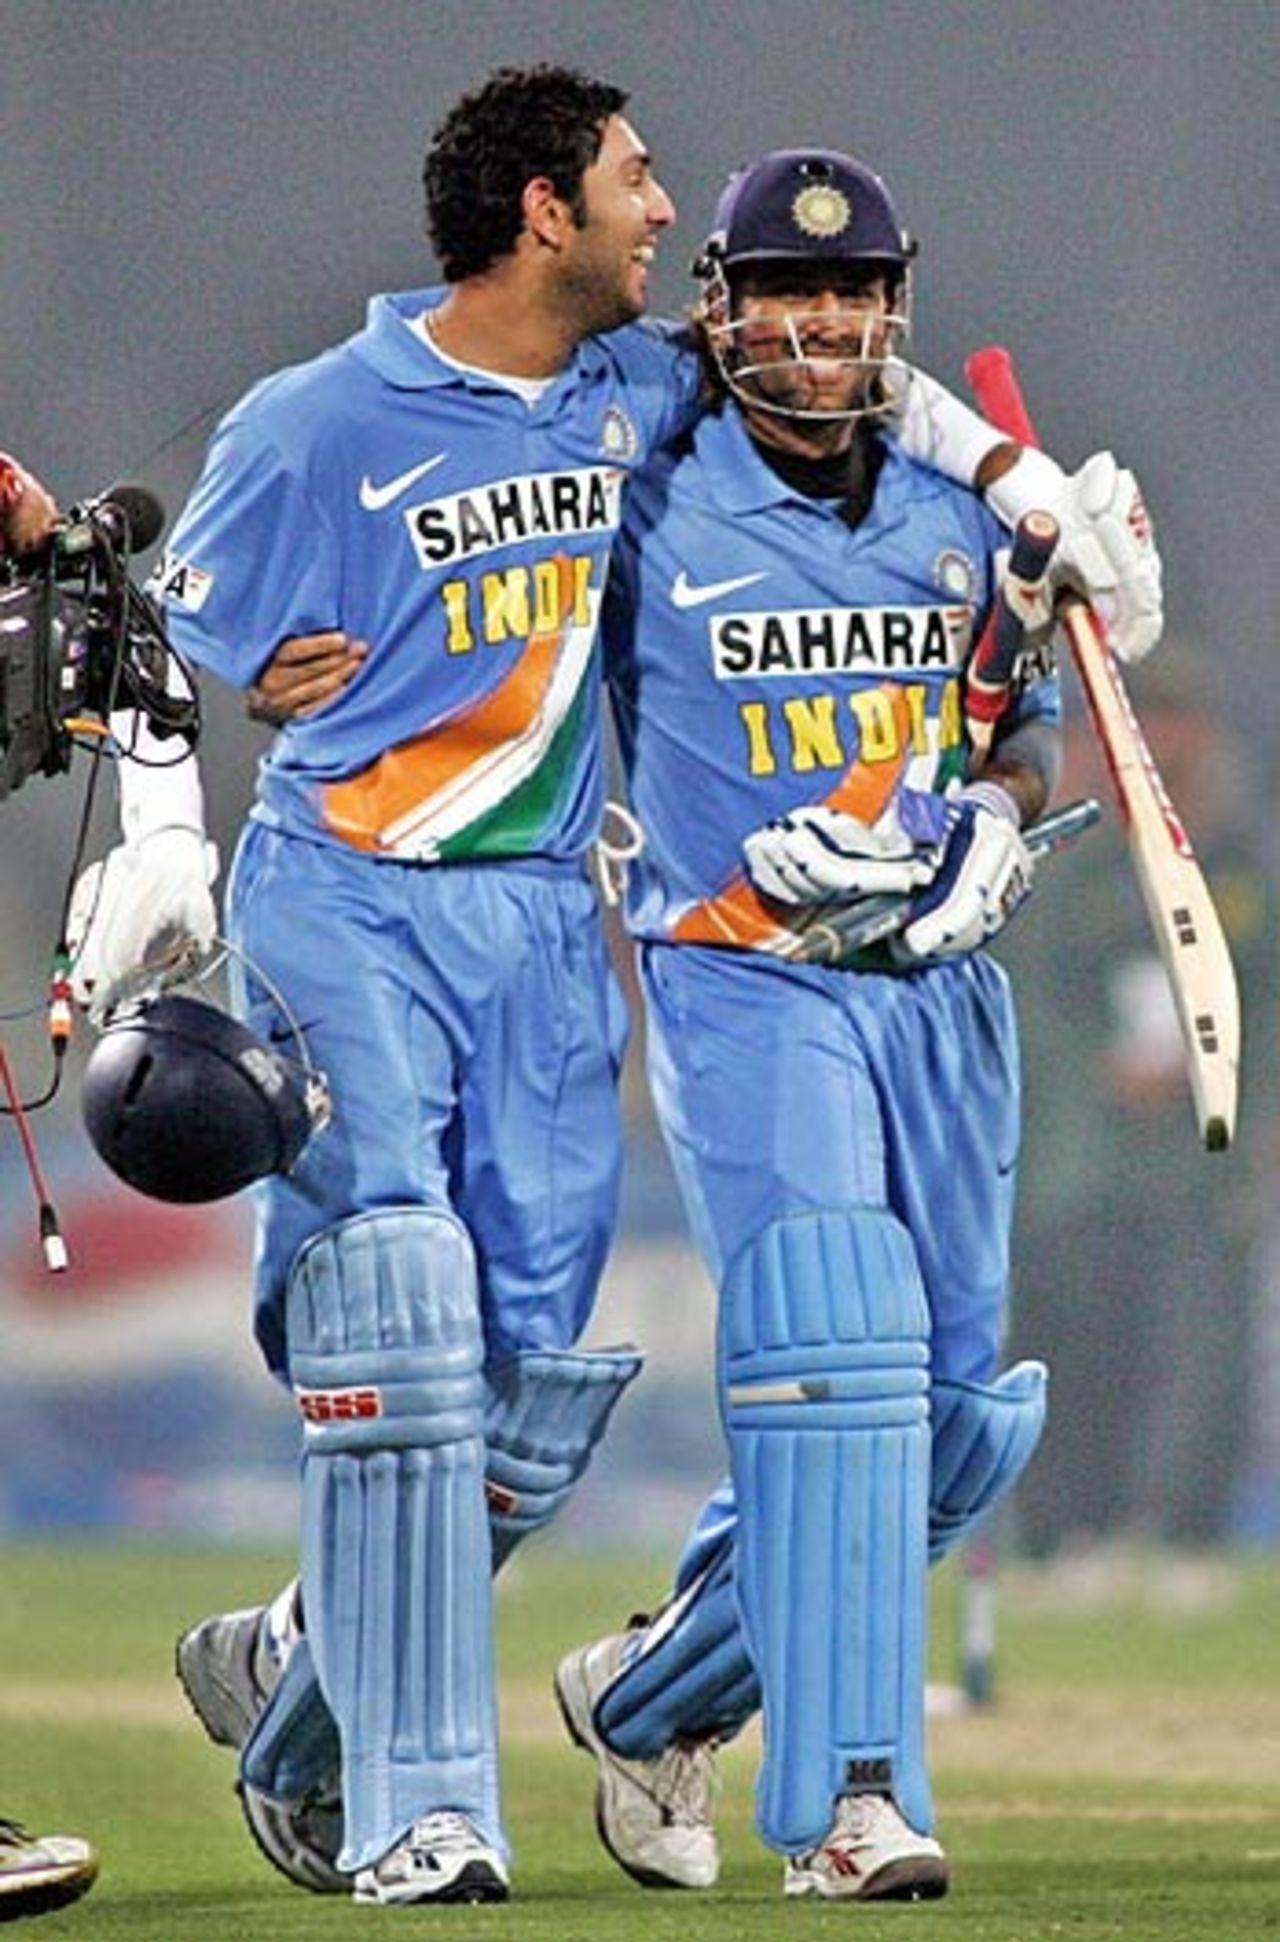 The duo that sealed it for India, Pakistan v India, 3rd ODI, Lahore, February 13, 2006